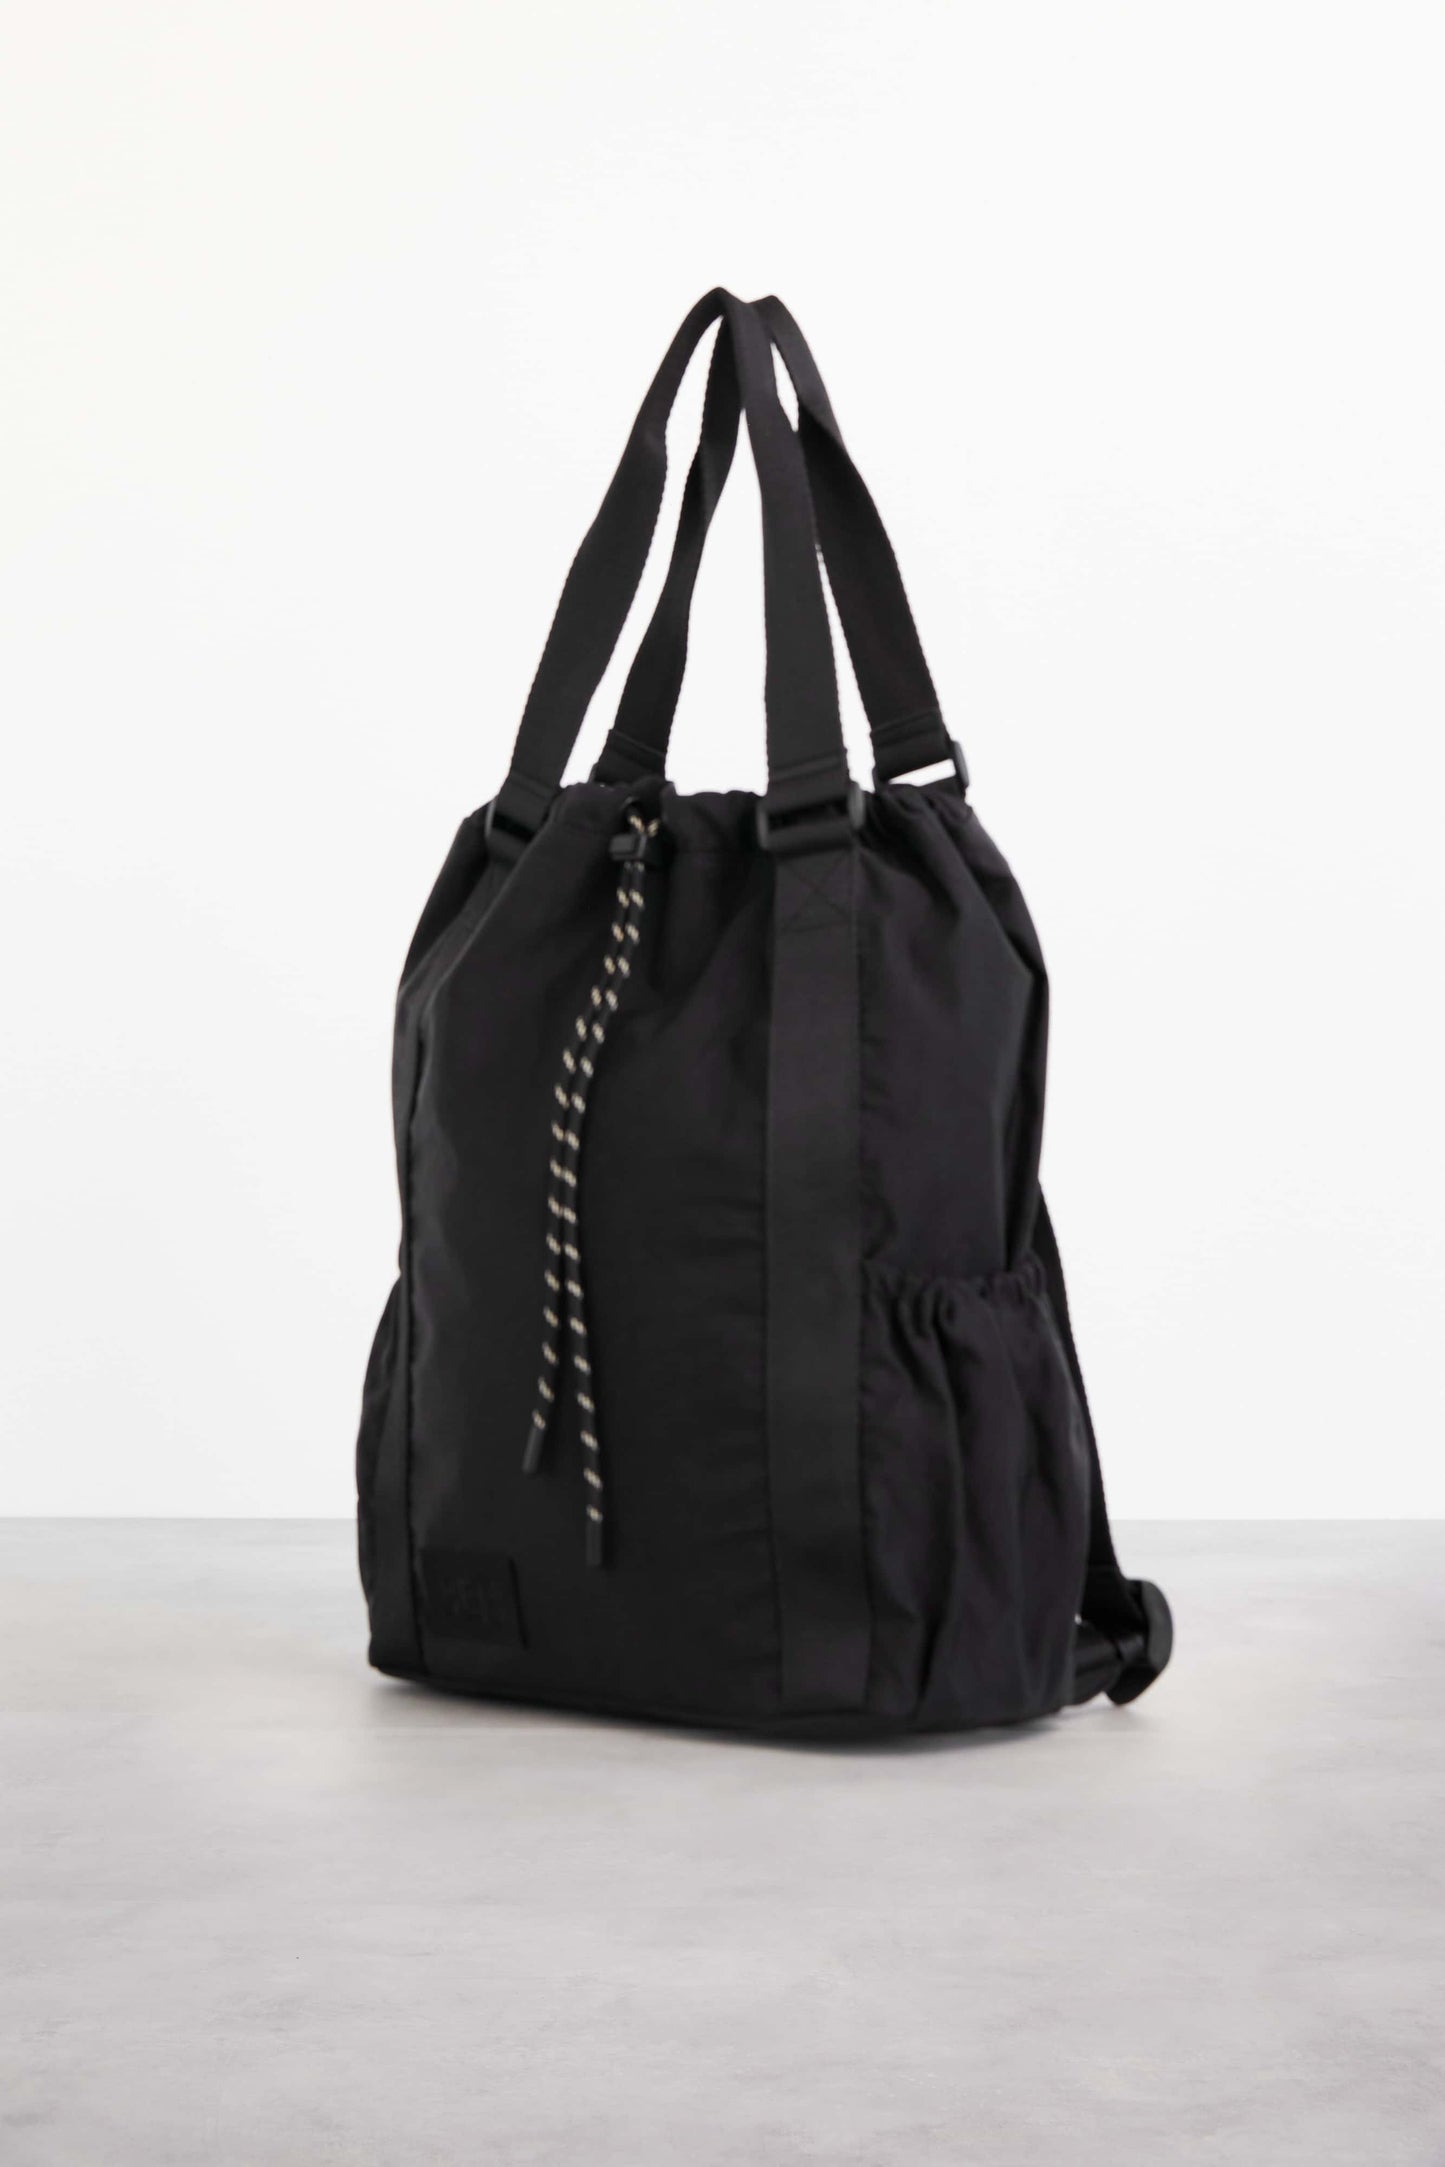 Sport Tote Black Front and Side